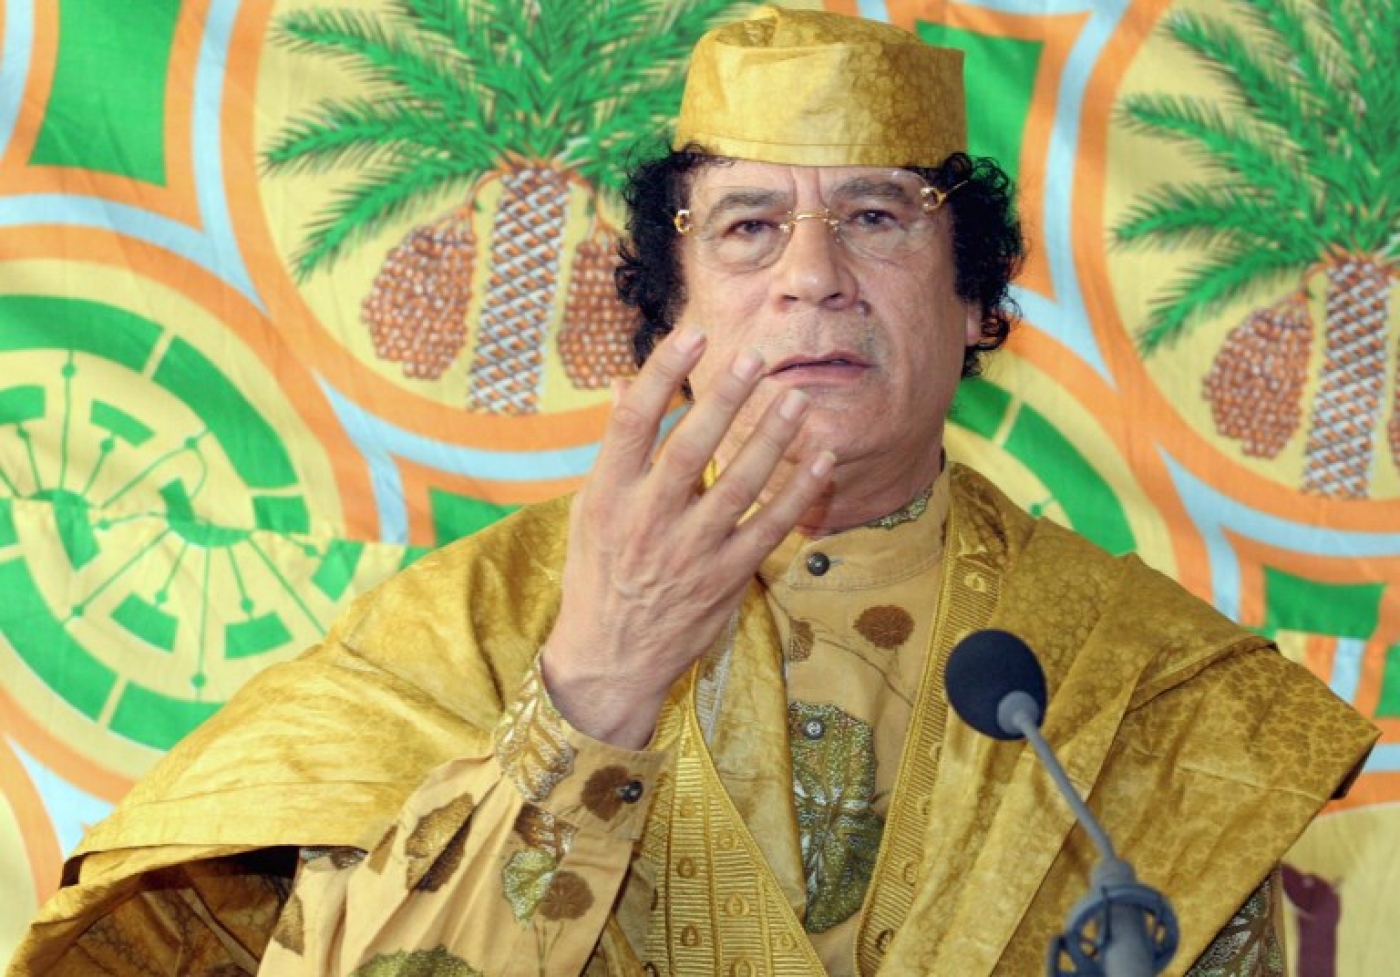 The late Colonel Muammar Gaddafi of Libya is pictured in 2005 (AFP)